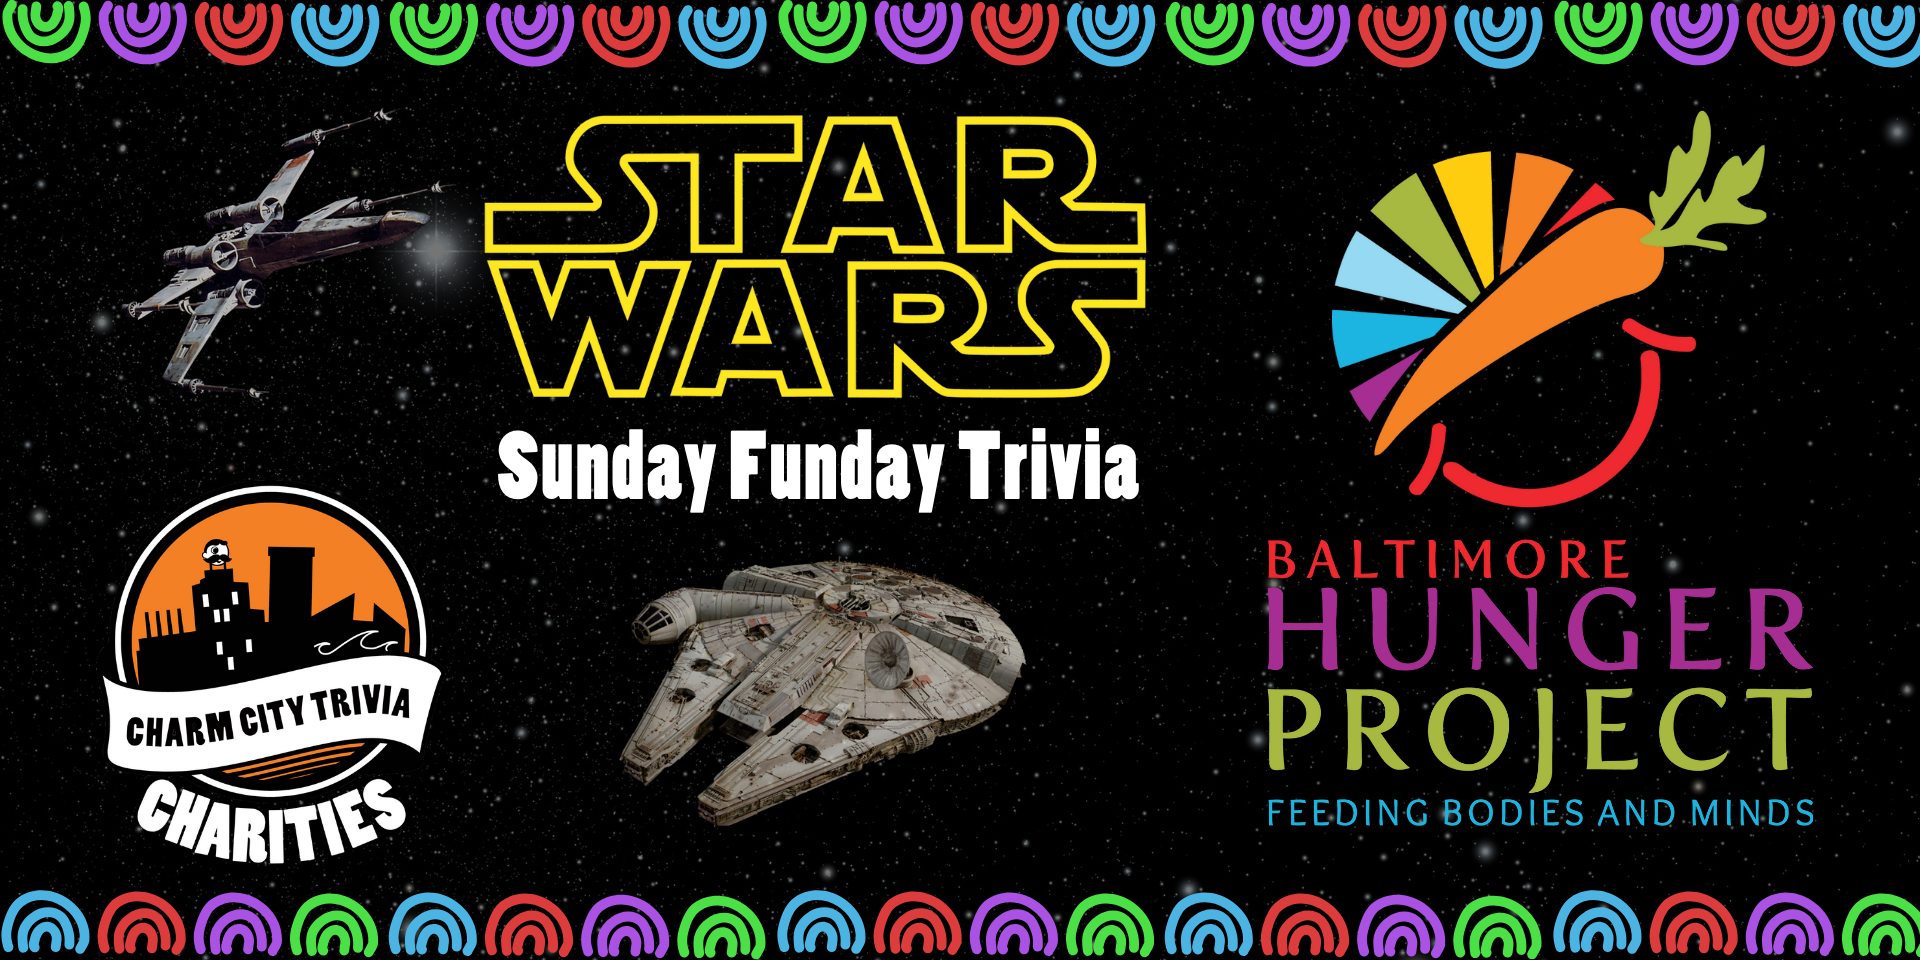 a starry space background with a colorful border, the Charm City Trivia Charities logo, the Baltimore Hunger Project logo, the Star Wars logo, the Millennium Falcon, an X-Wing, and white text. The text reads: Sunday Funday Trivia